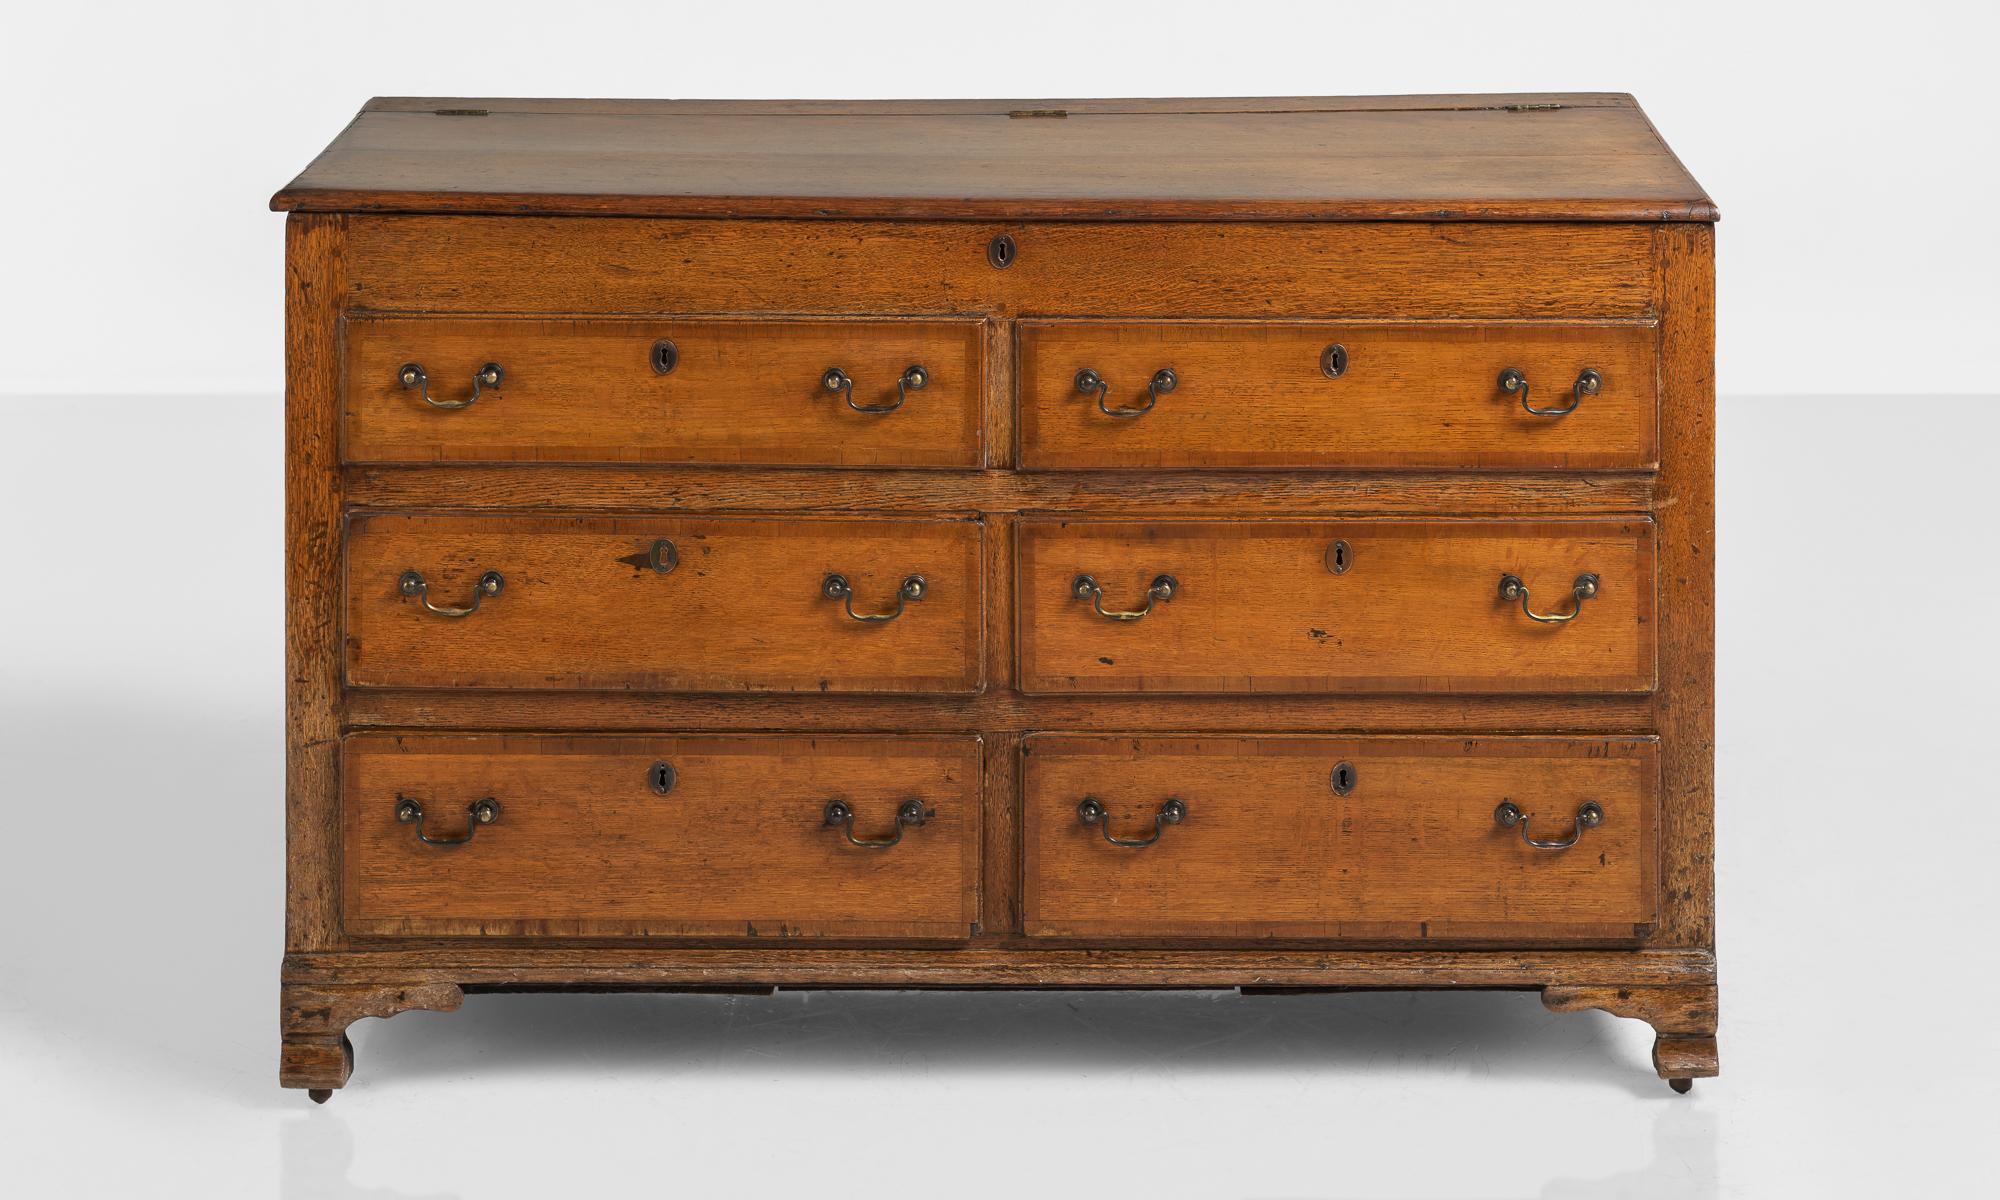 Lancashire Oak Chest, England, circa 1790

Solid oak chest with original brass hardware. Top opens for storage.